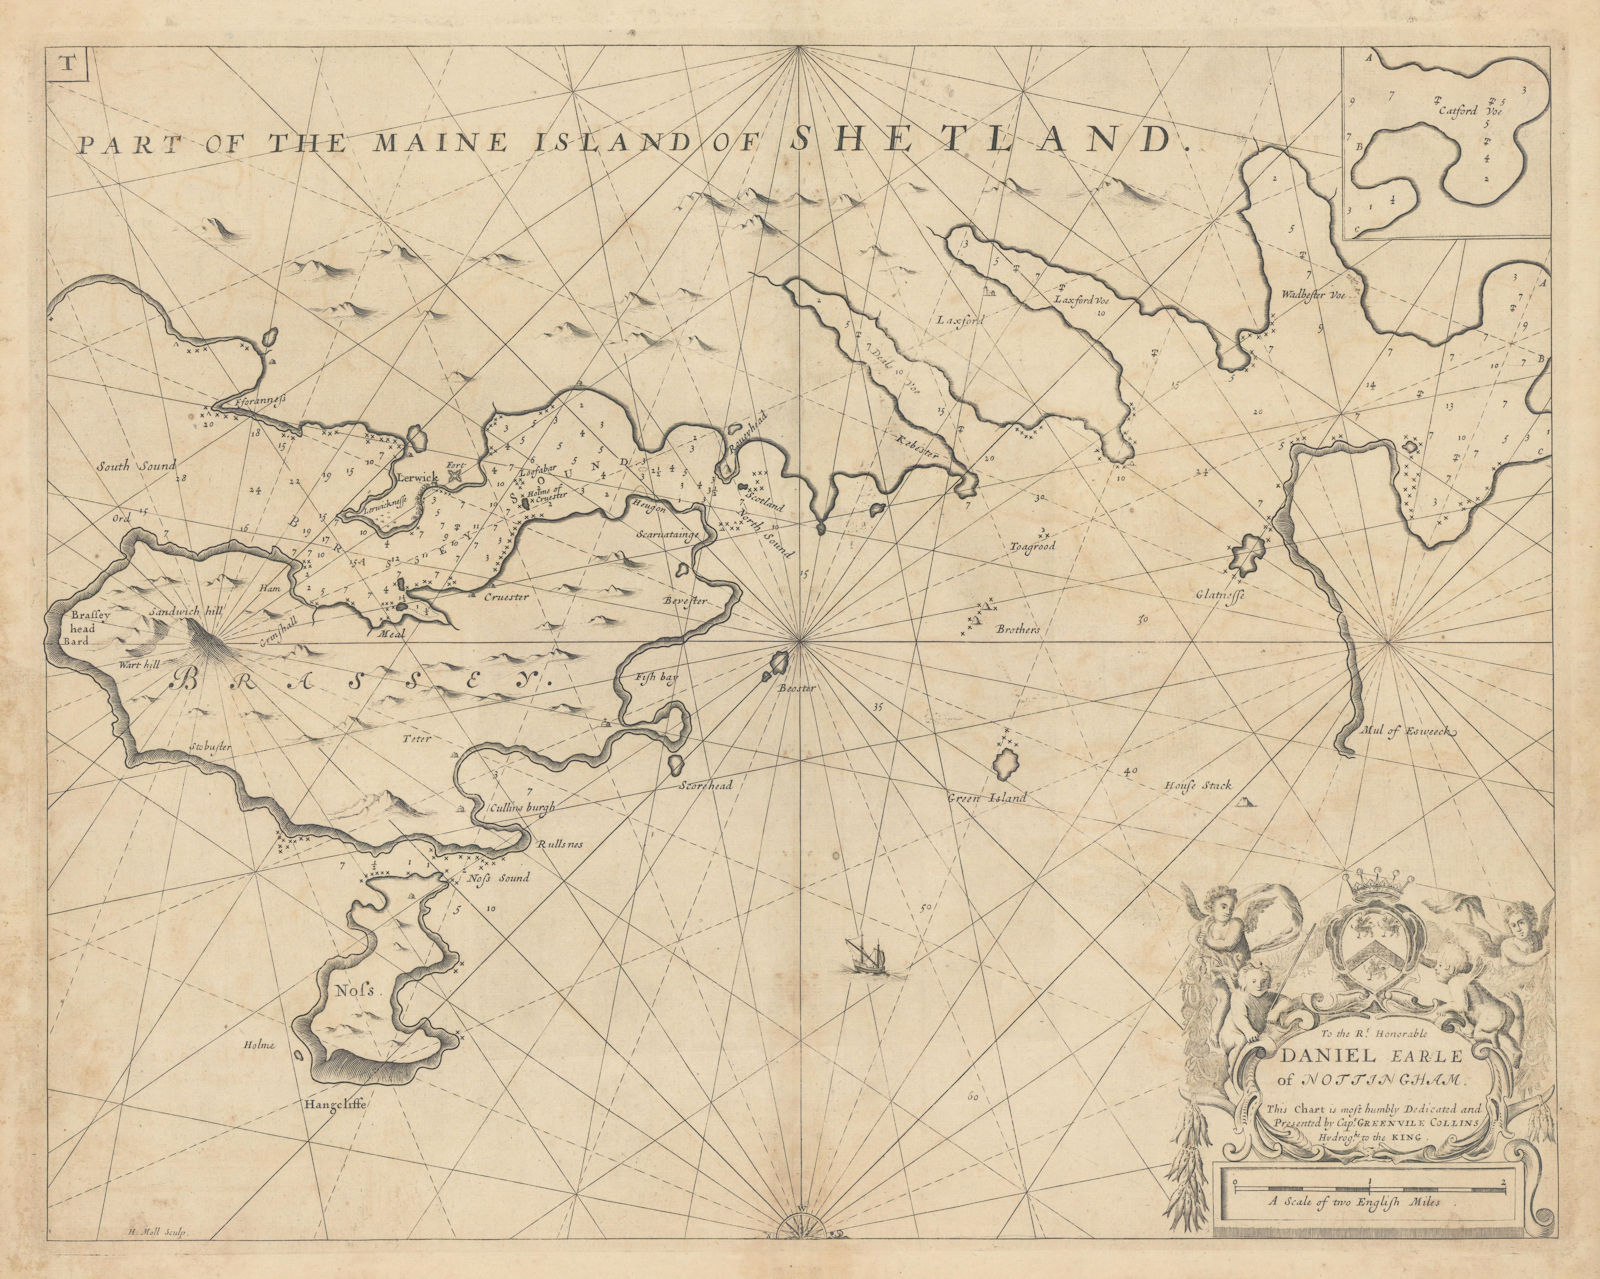 Associate Product Part of the Maine Island of Shetland sea chart. Lerwick Bressay COLLINS 1723 map